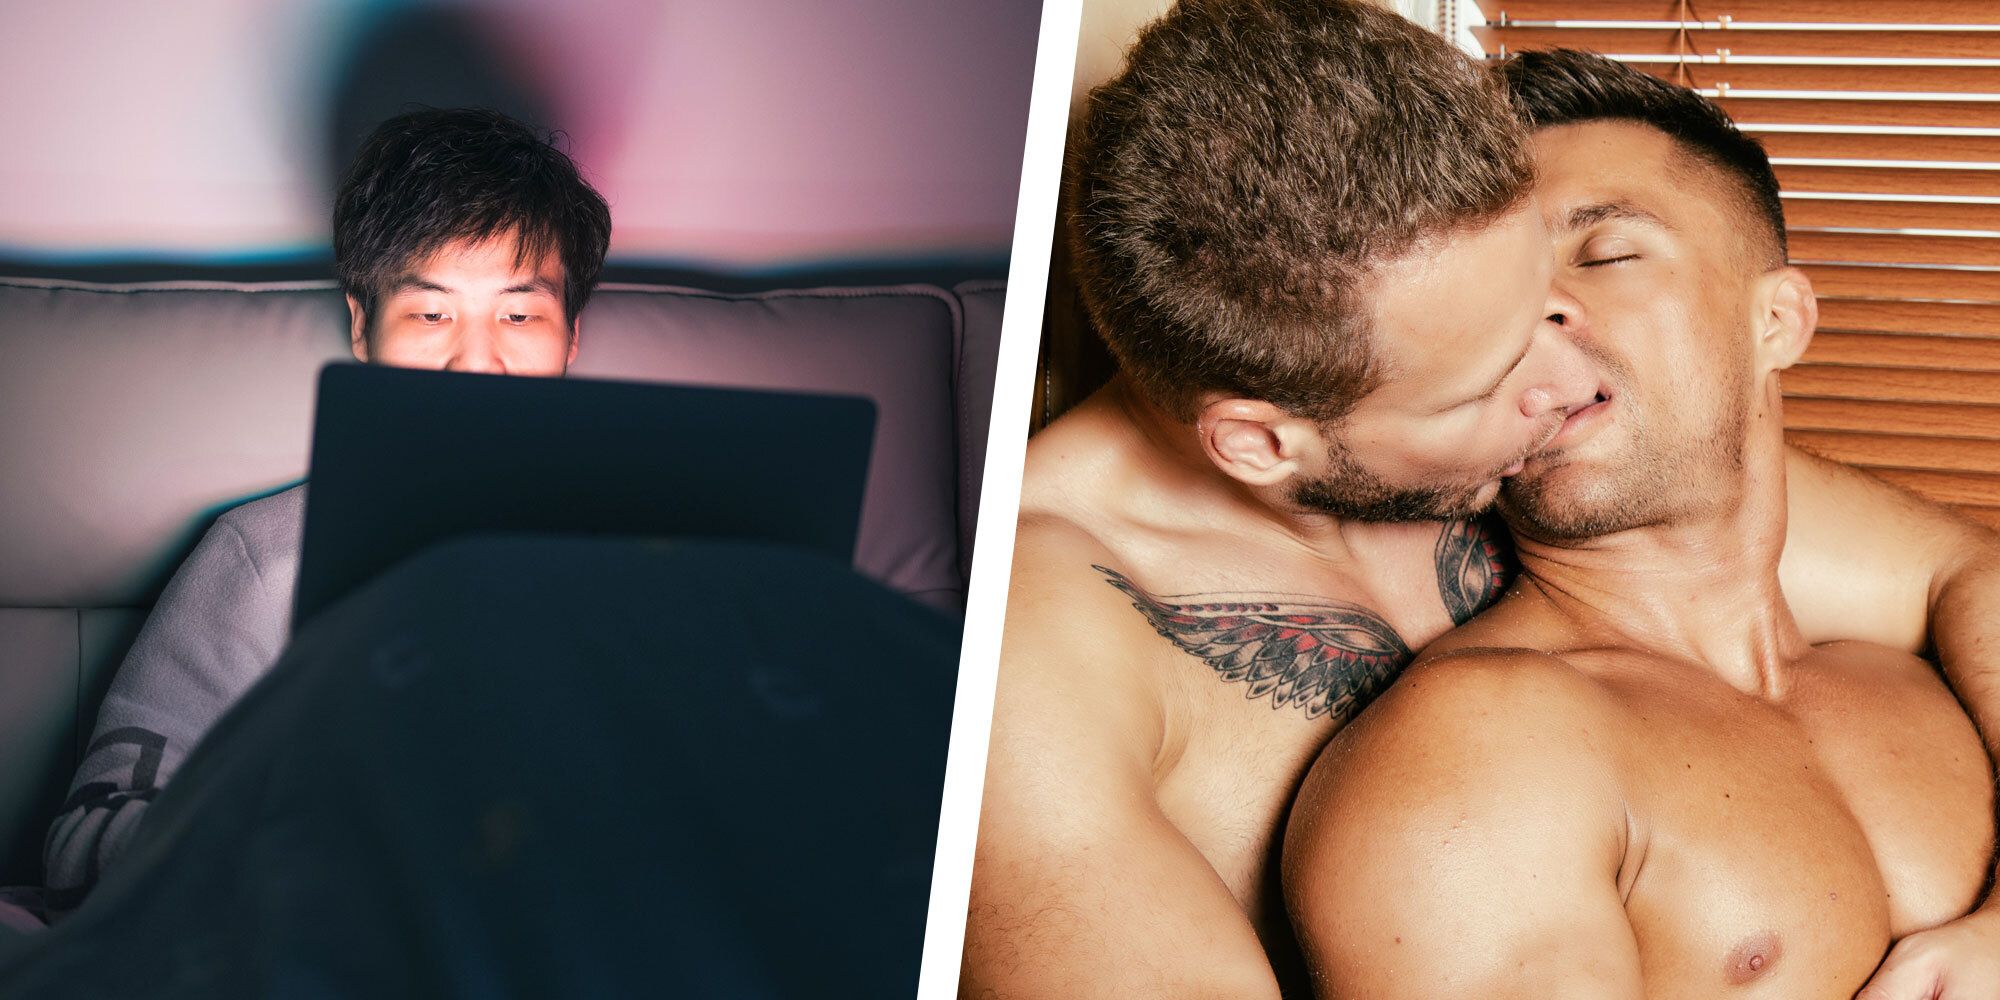 The Straight Men Who Love Queer Porn pic image